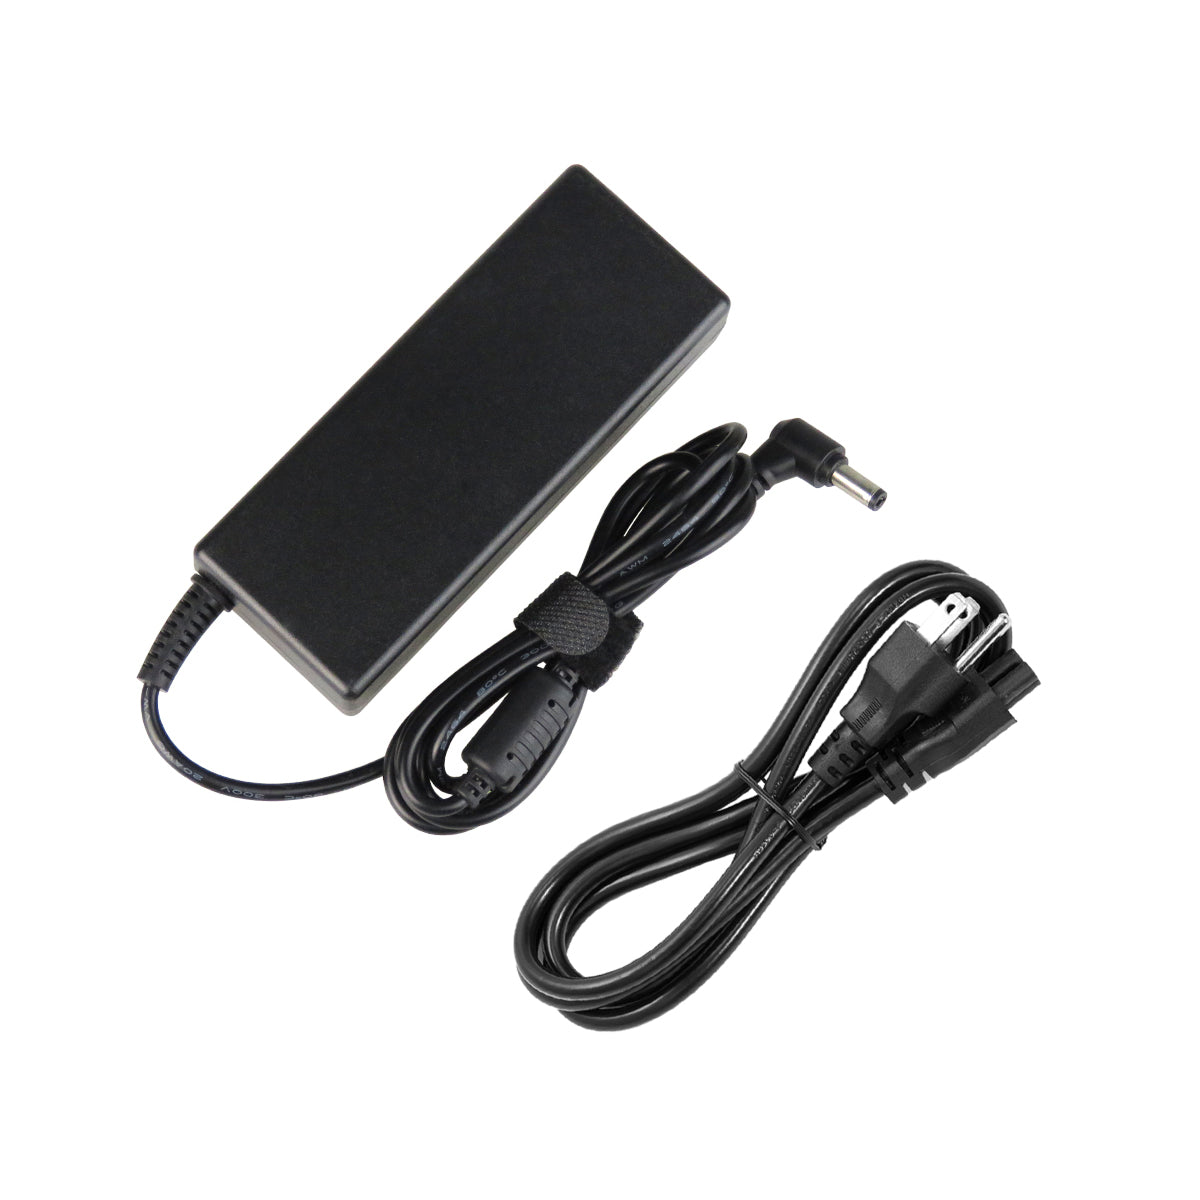 AC Adapter Charger for ASUS X64VN Notebook.